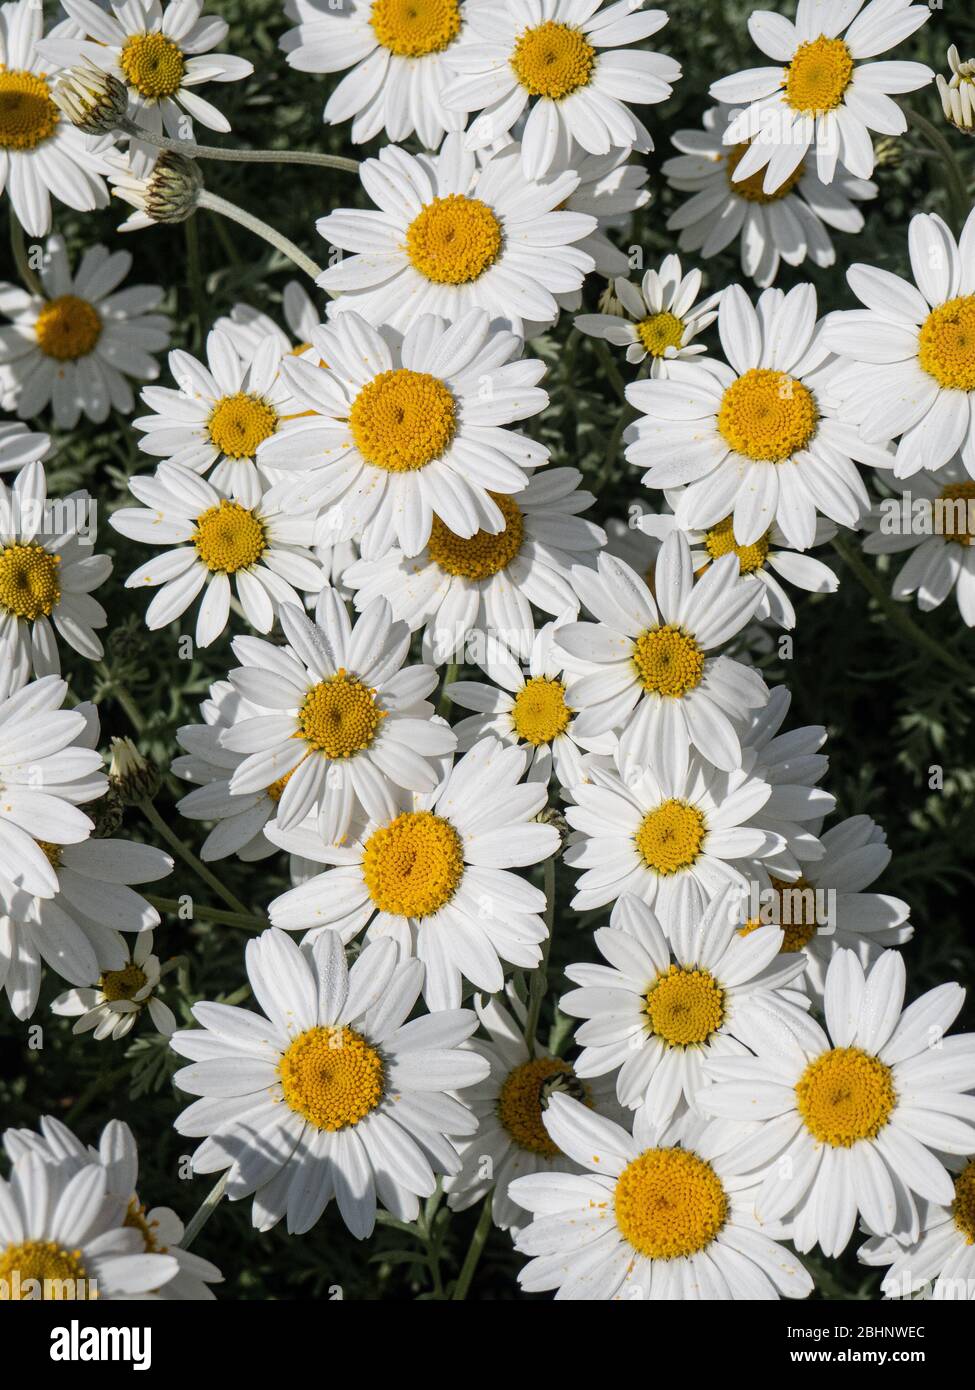 A group of the white daisy flowers of Anthemis punctata subsp. cupaniana Stock Photo